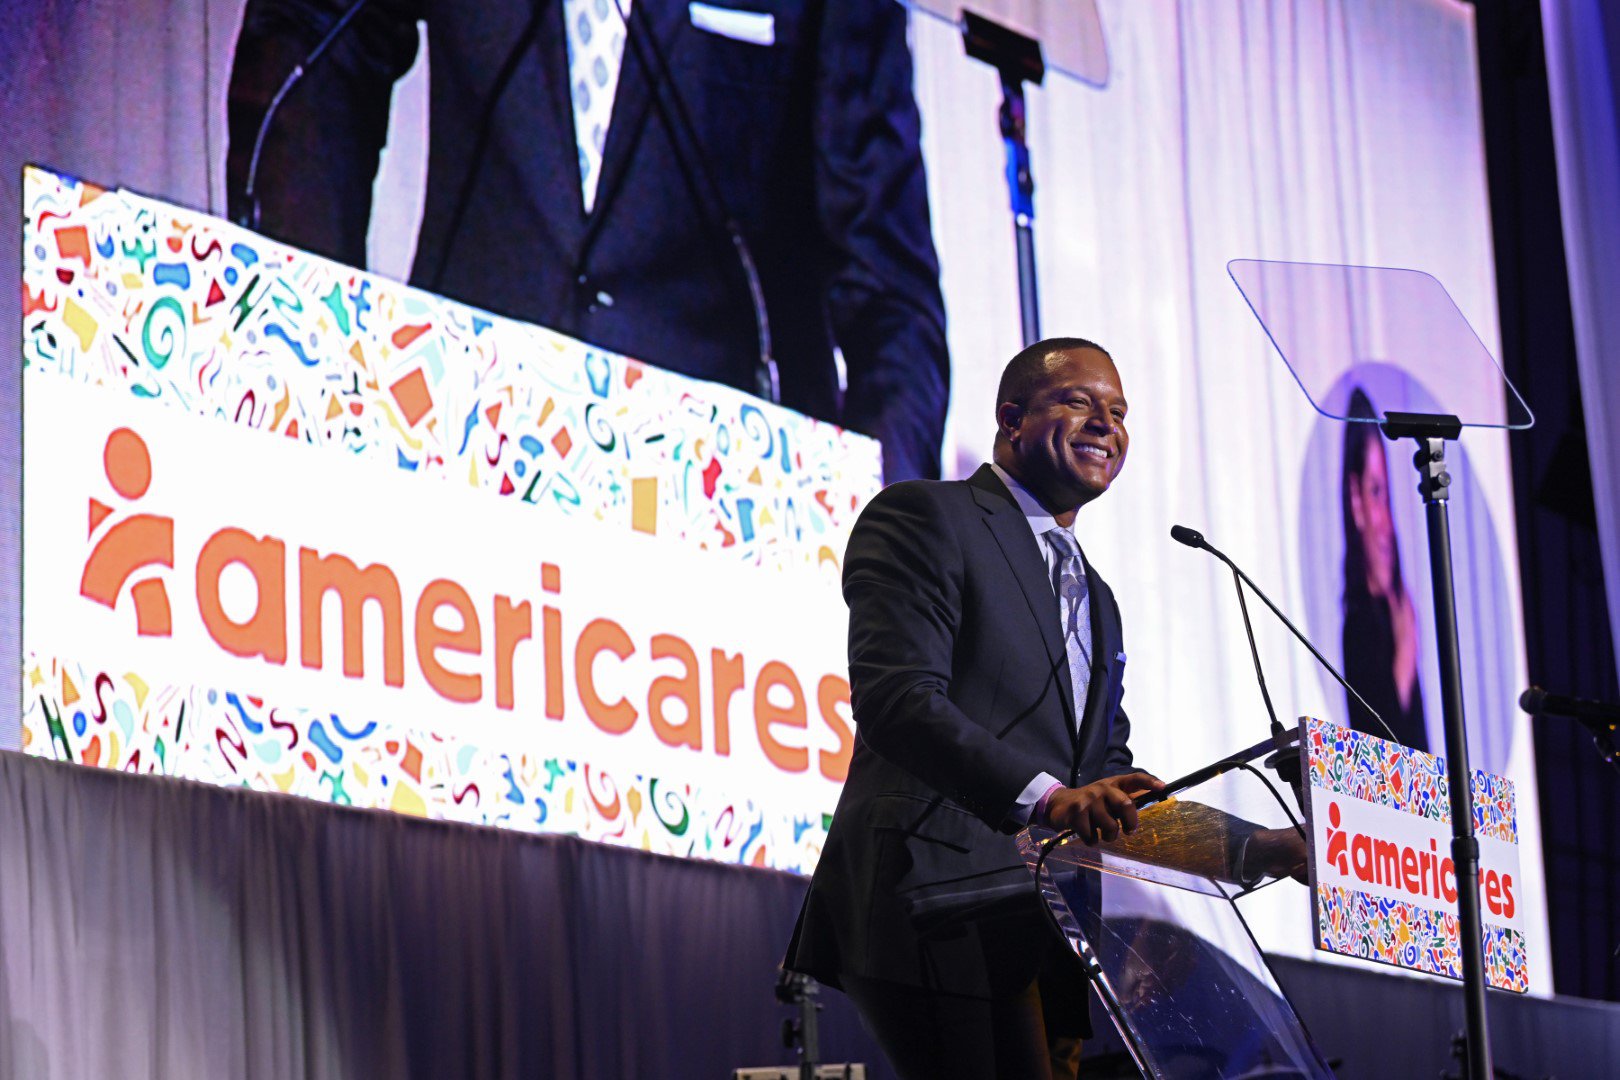 News Anchor, NBC News’ “TODAY” and Co-Host, “3rd Hour of TODAY” and Master of Ceremonies Craig Melvin speaks onstage at the 2022 Americares Airlift Benefit at Westchester County Airport on October 1, 2022. Photo by Bryan Bedder/Getty Images for Americares.